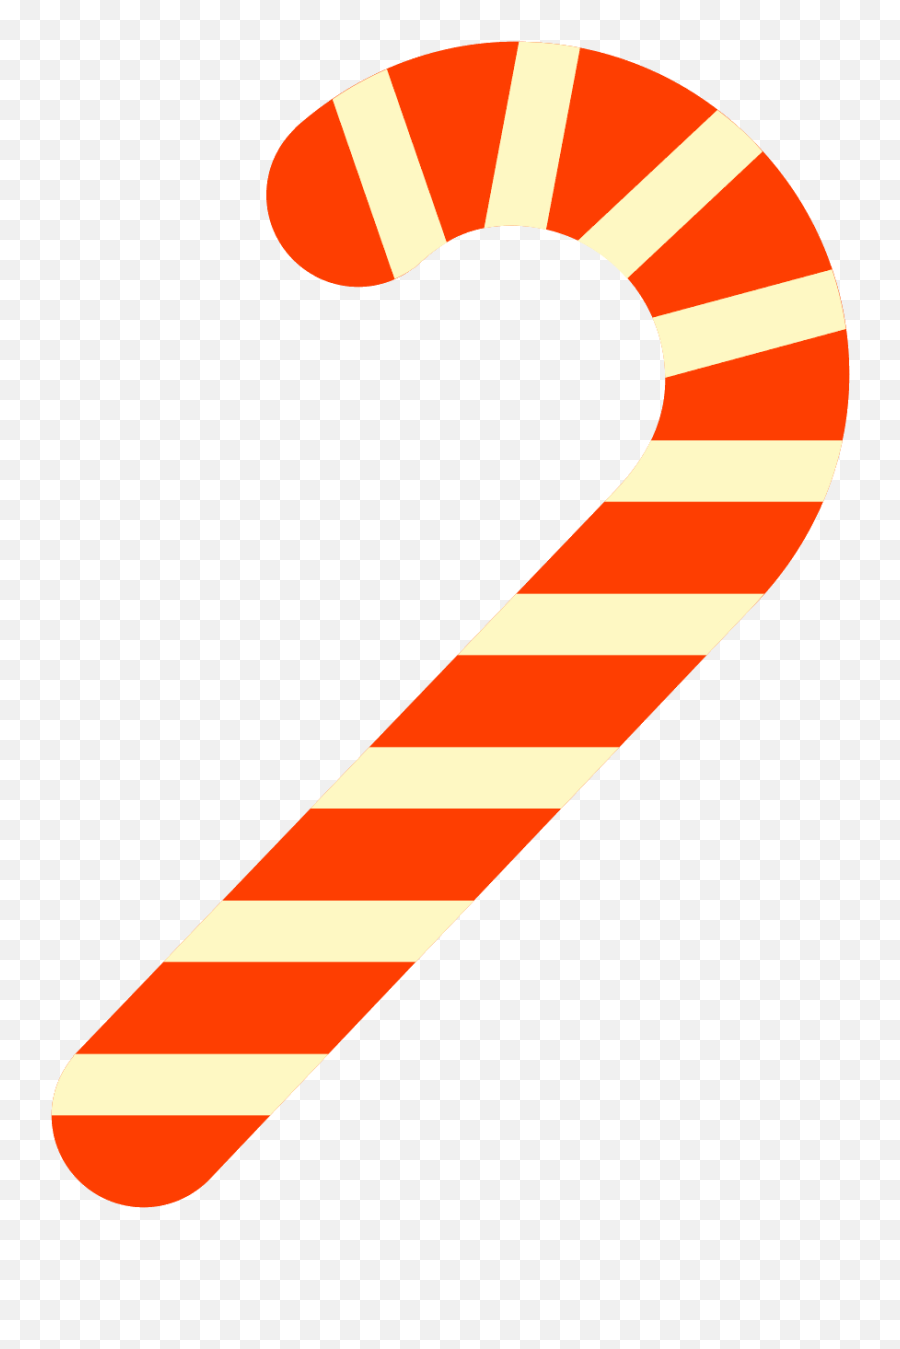 Download Candy Cane Icon - Candy Cane Png Image With No Candy Cane,Candy Cane Transparent Background